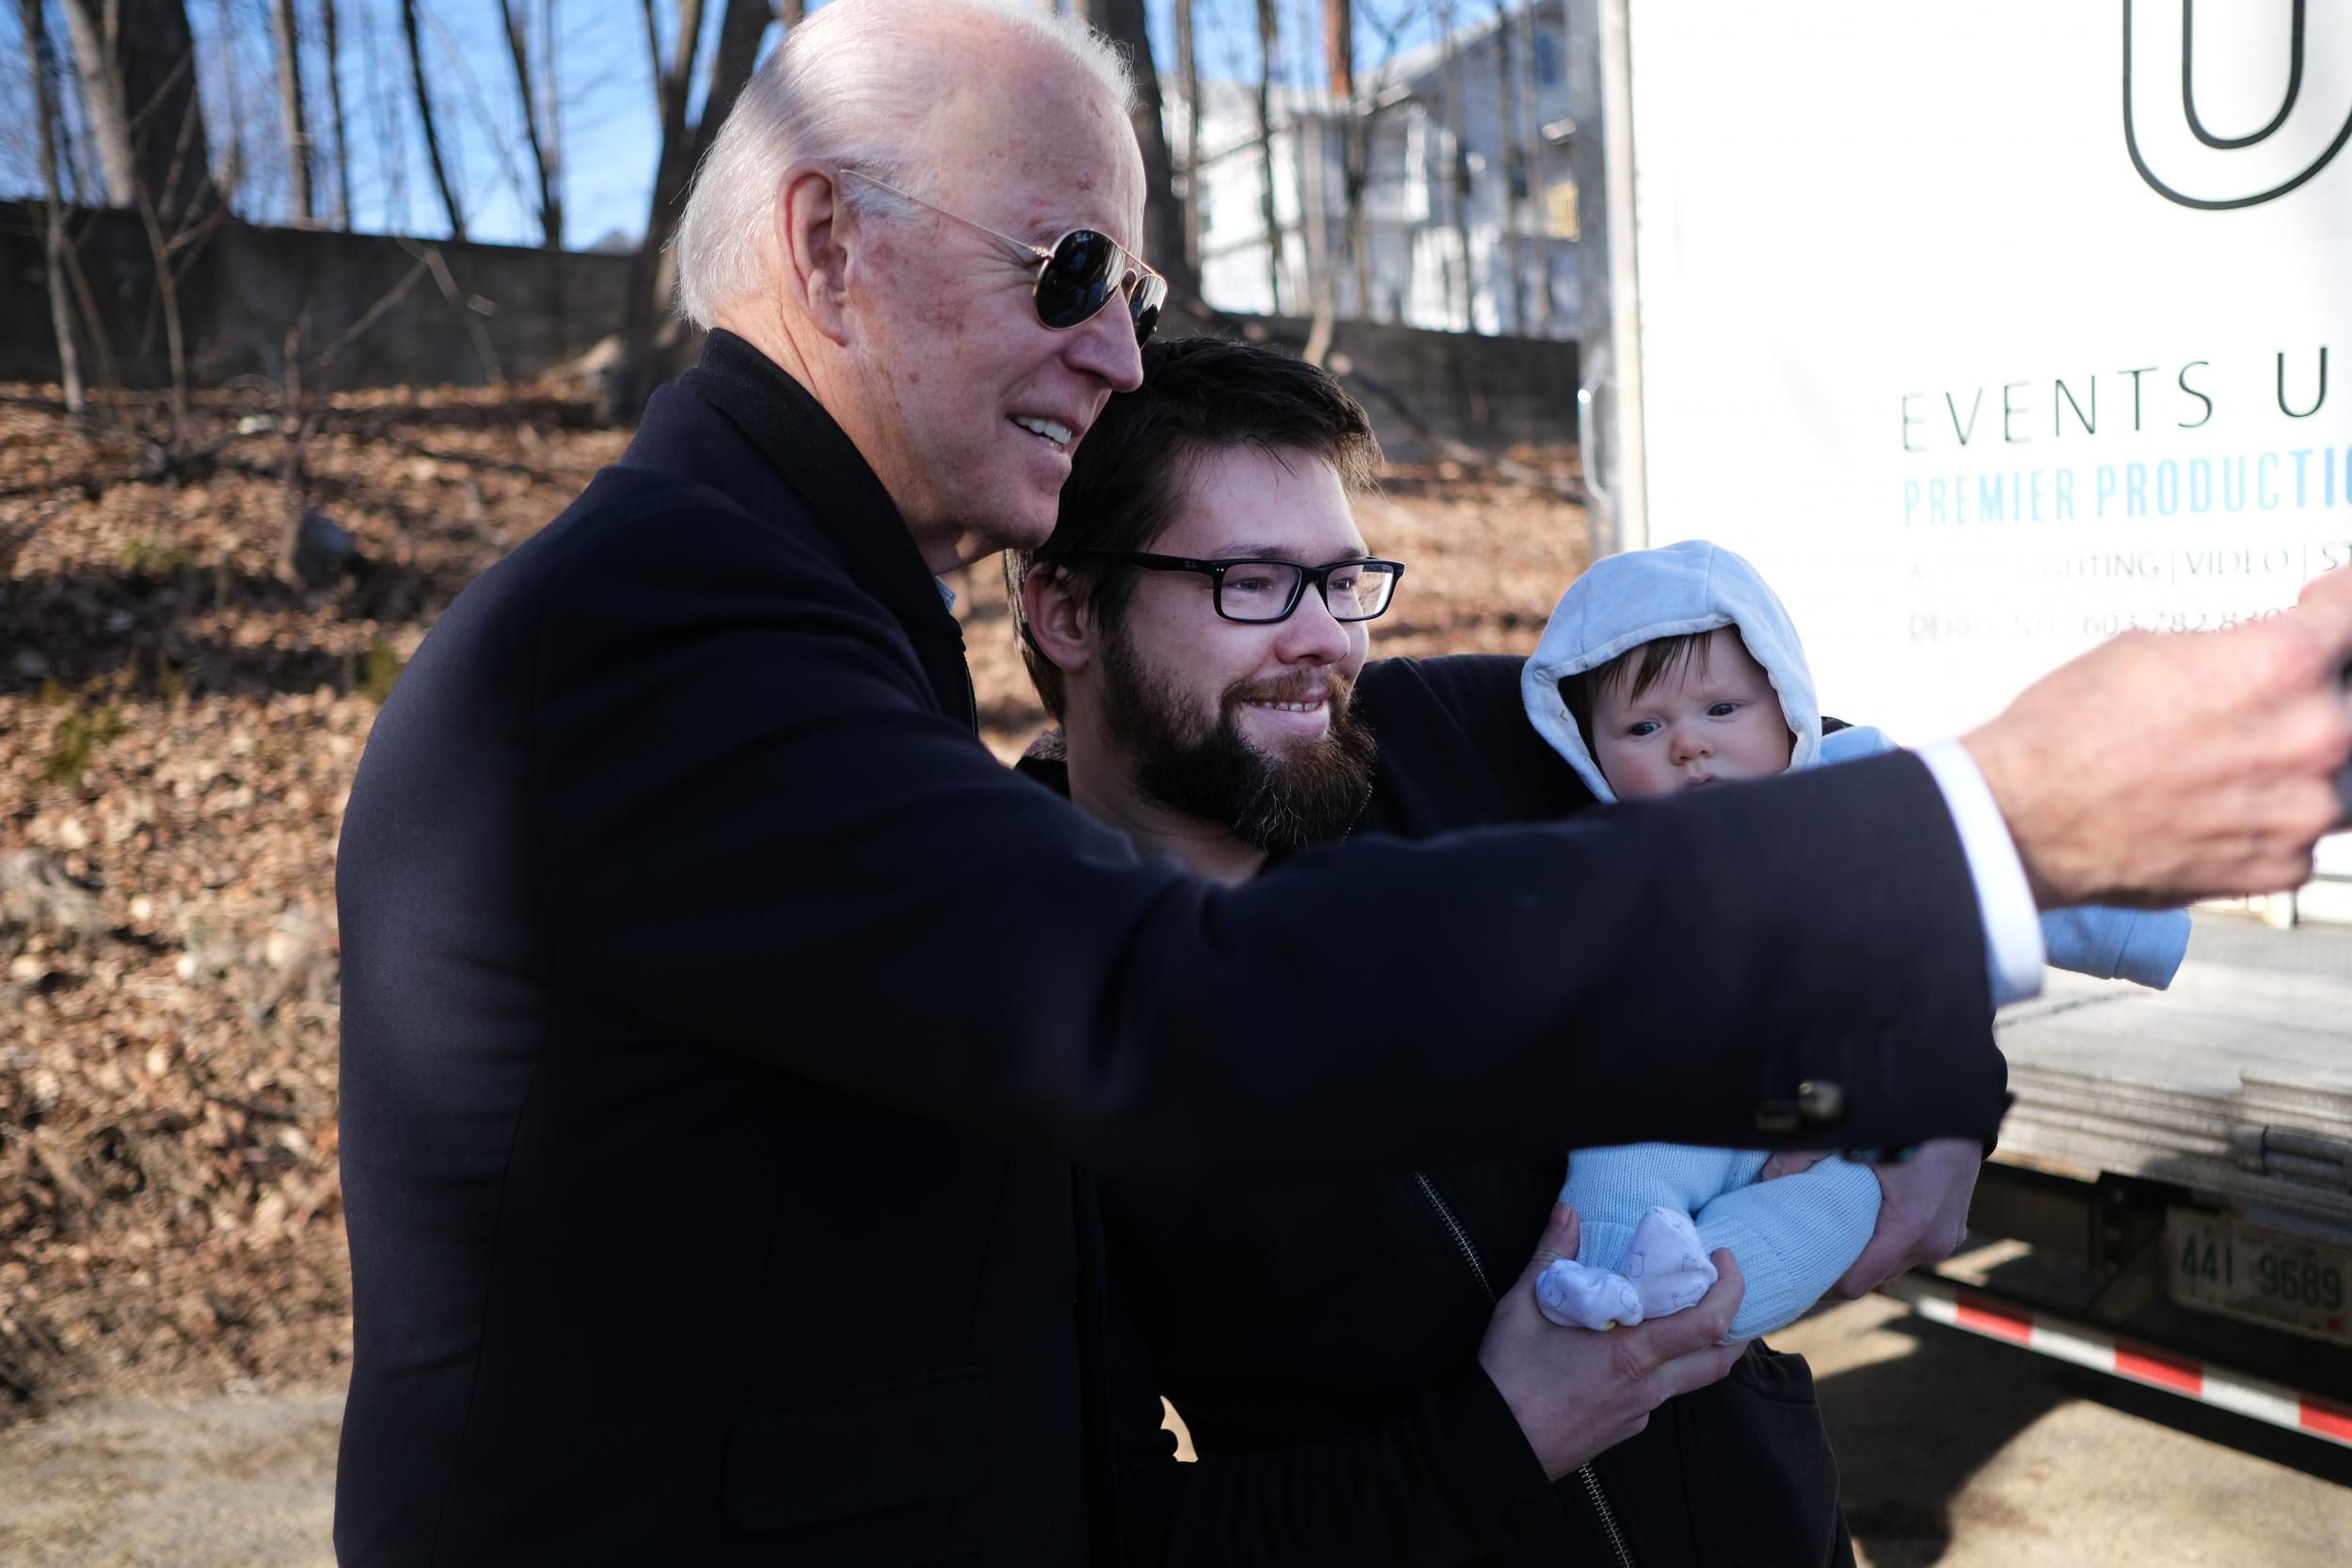 When politicians campaign with babies as photo-ops, it is often a bad sign